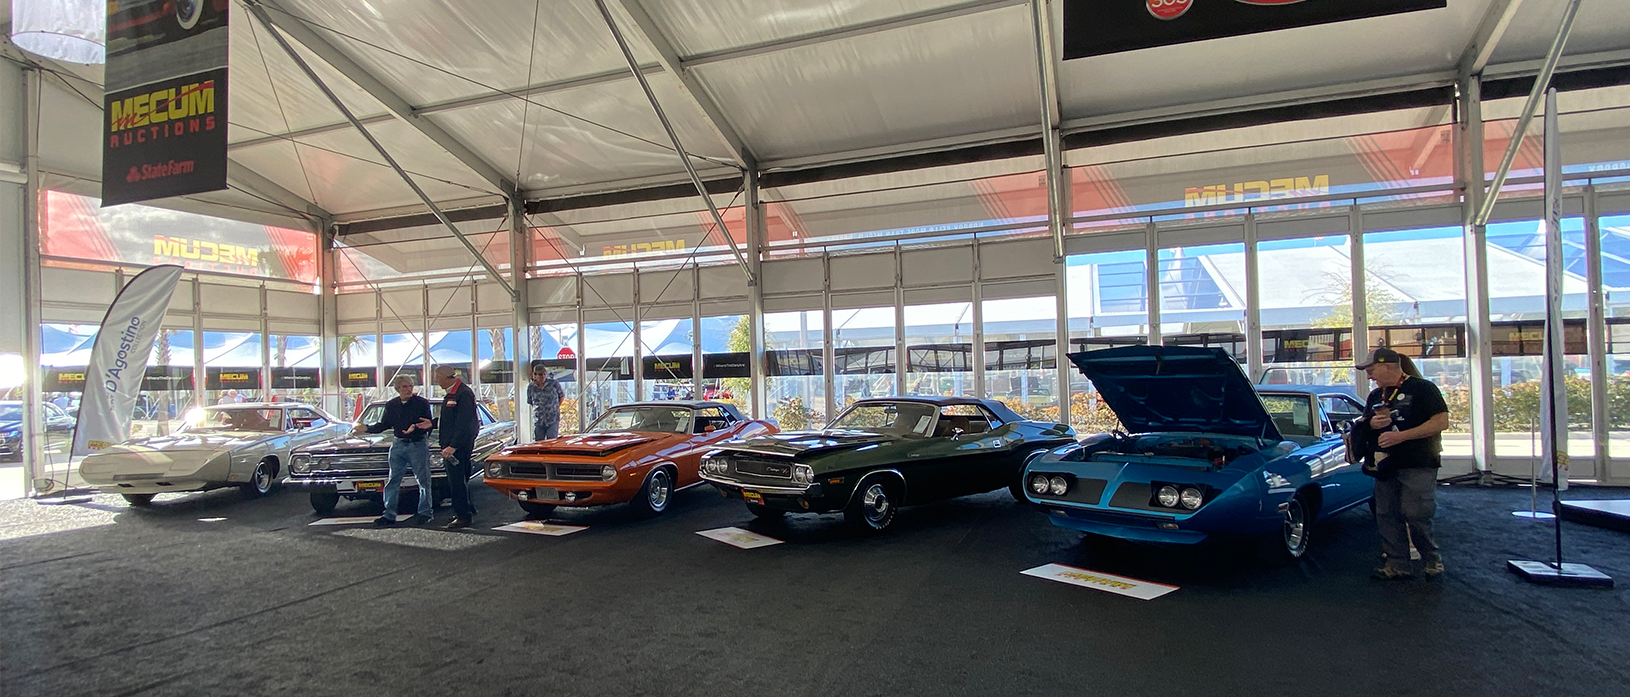 Tony D’Agostino Collection Hits the Block at Mecum Auctions in Kissimmee